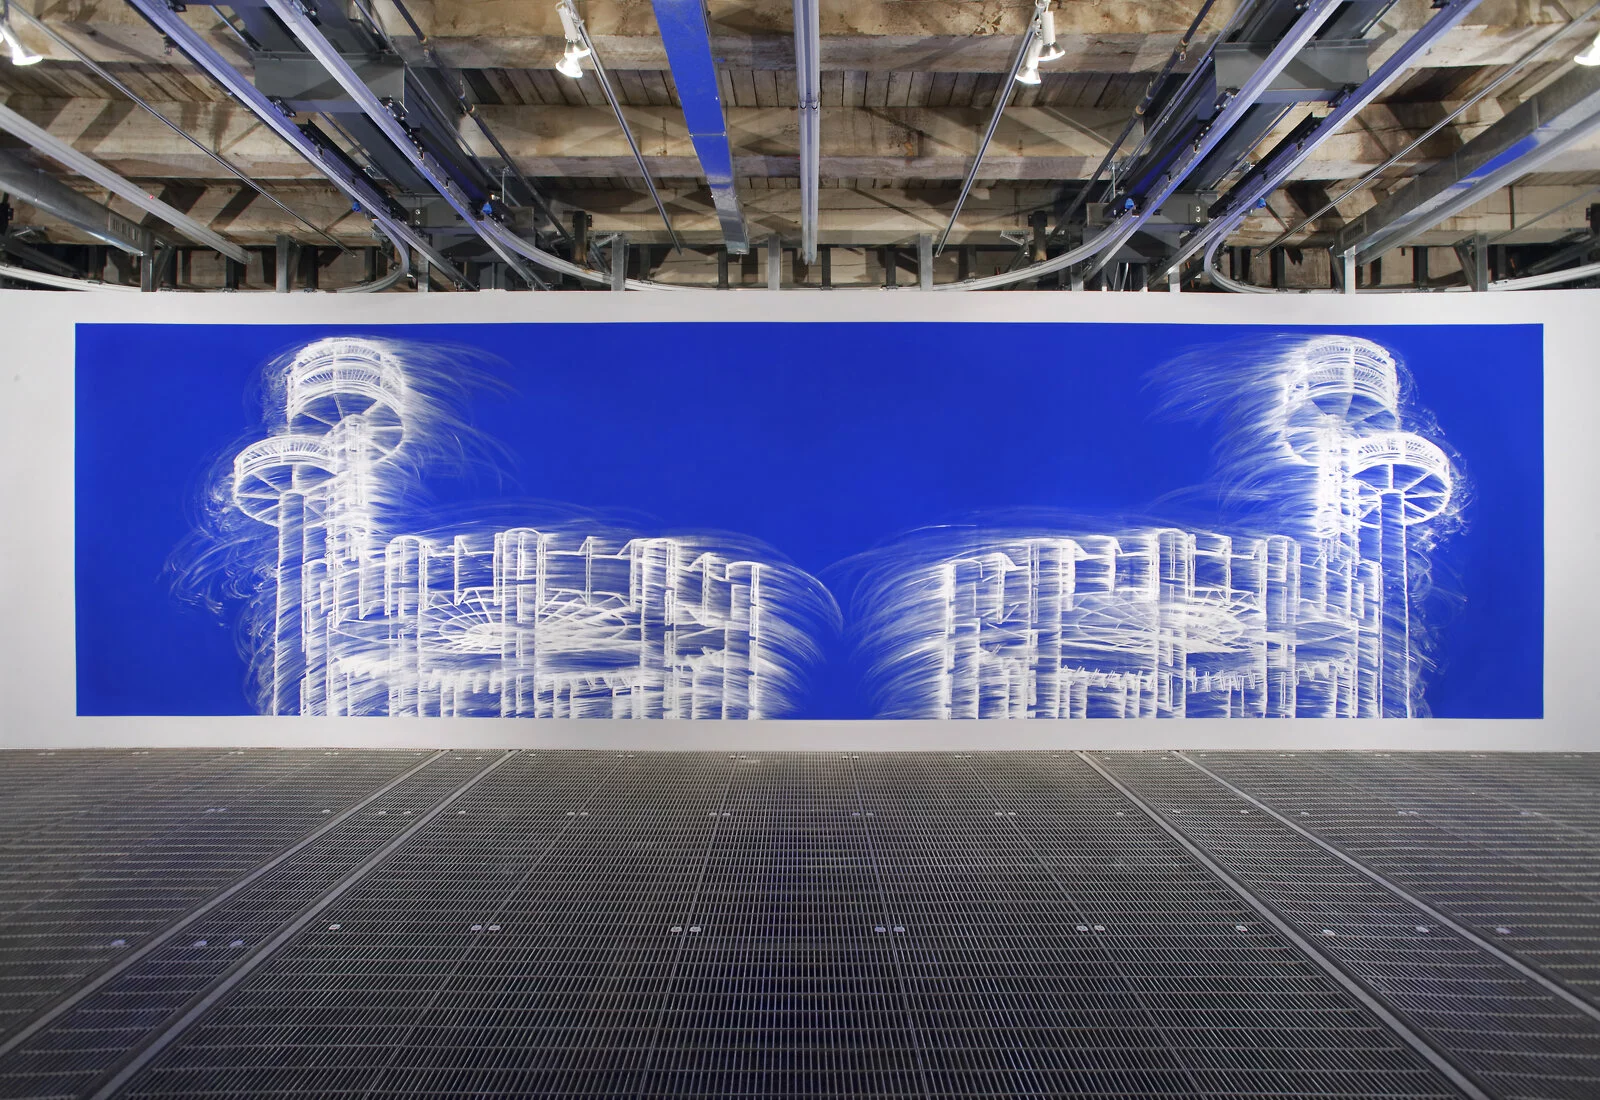 A wide blue artwork with a smeared white line drawing hangs on a white wall in an industrial-type room.